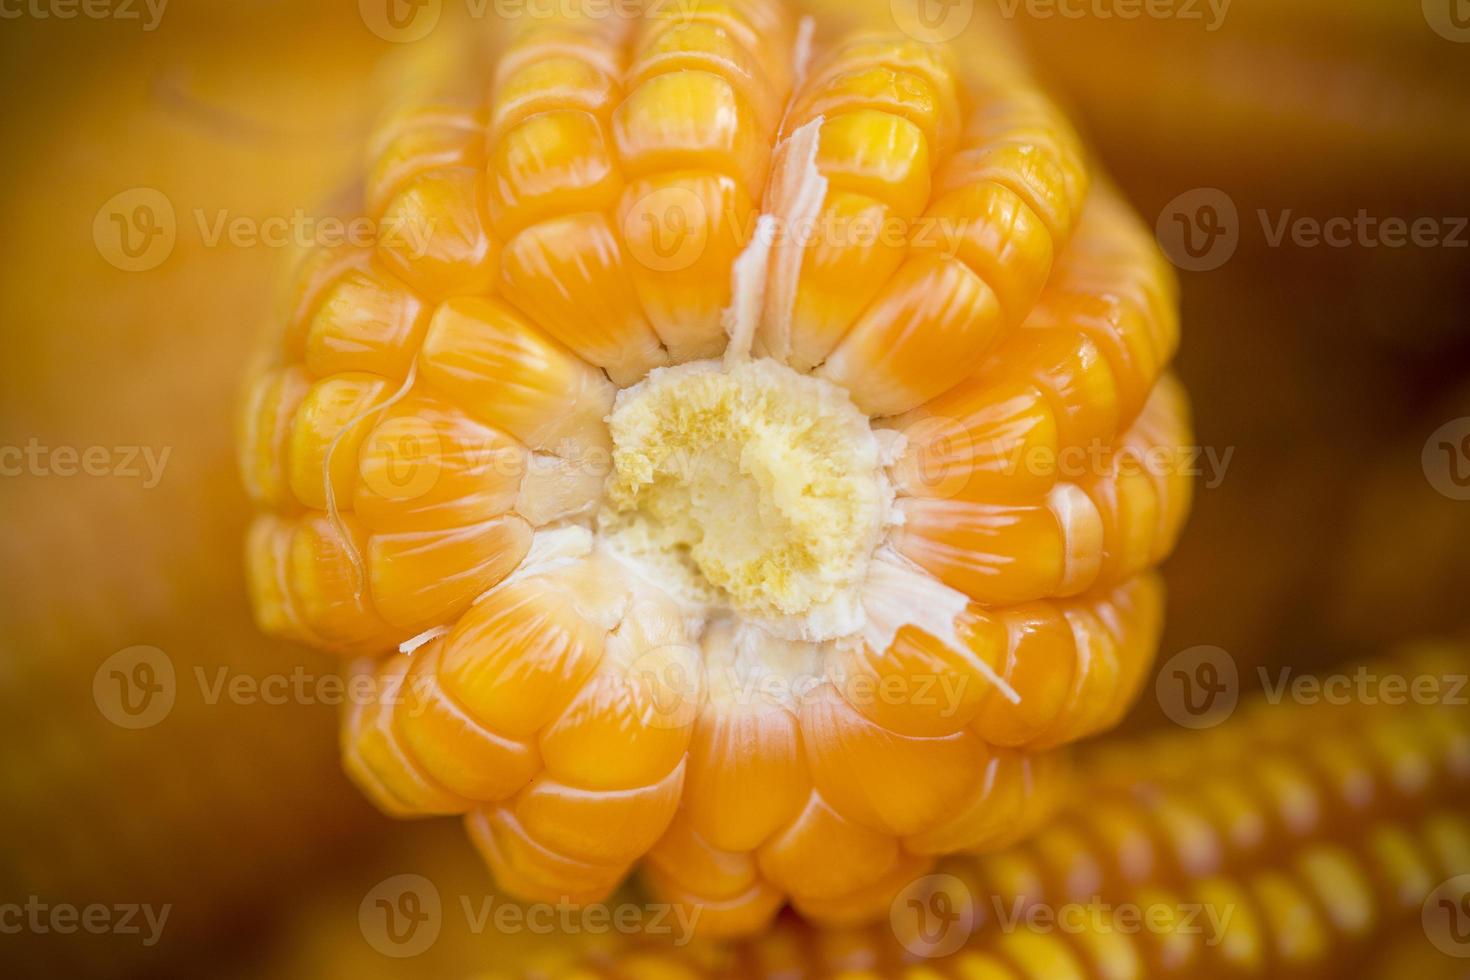 Fresh and golden raw maize crops seed patterns close-up views. photo